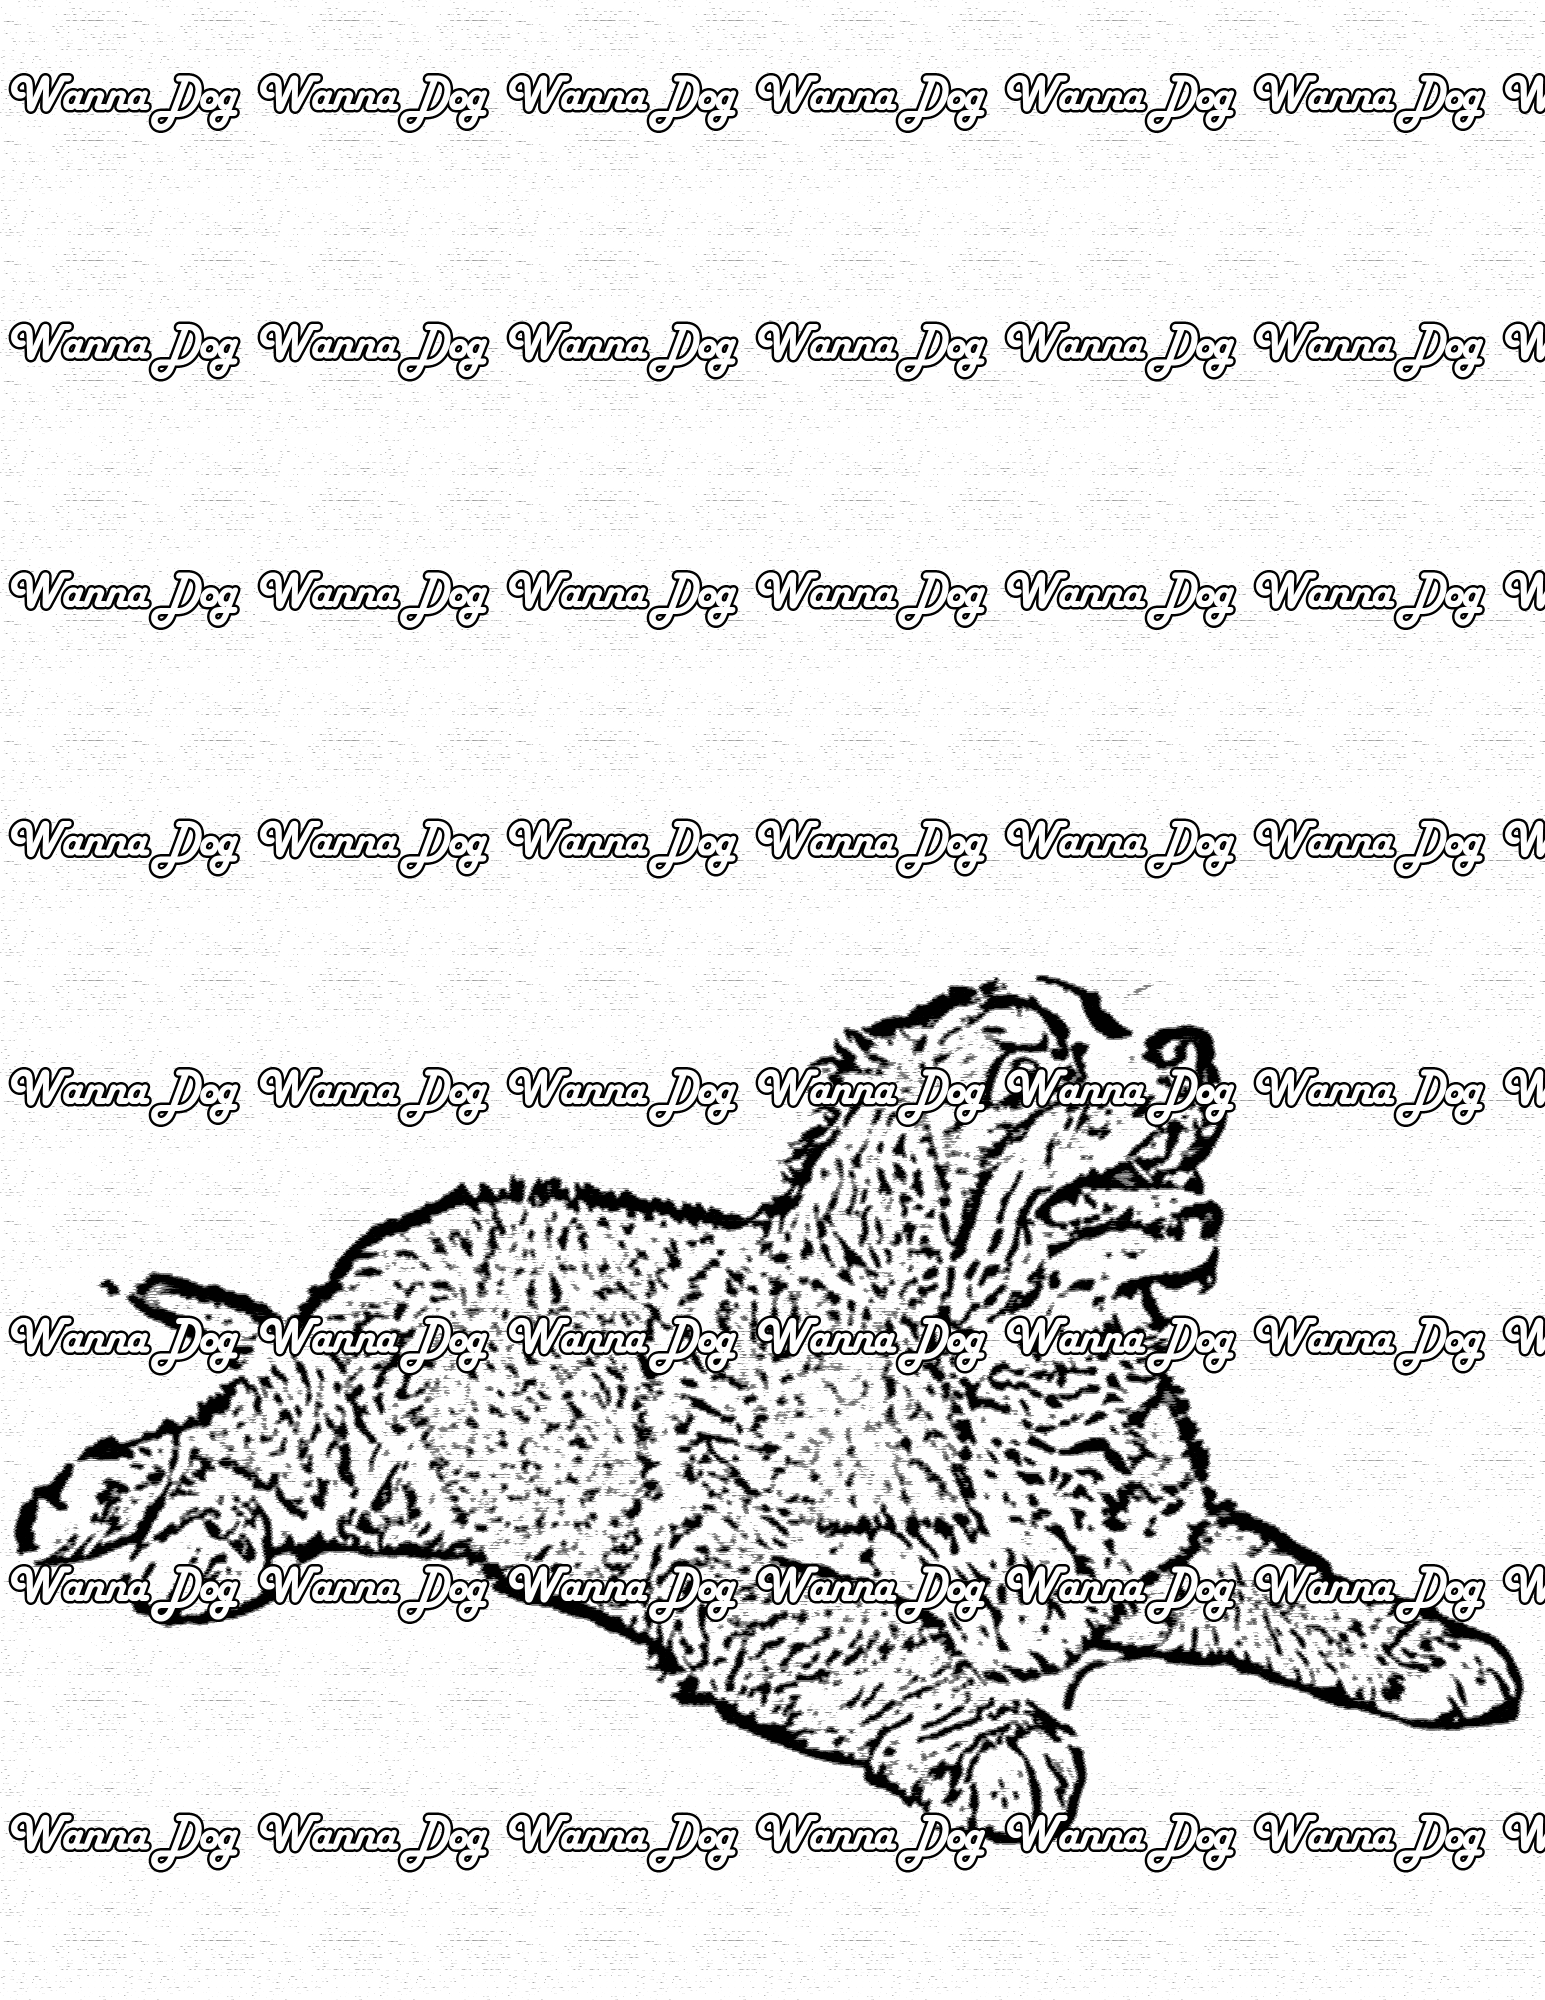 Bernese Mountain Dog Coloring Page of a Bernese Mountain Dog laying down and looking up